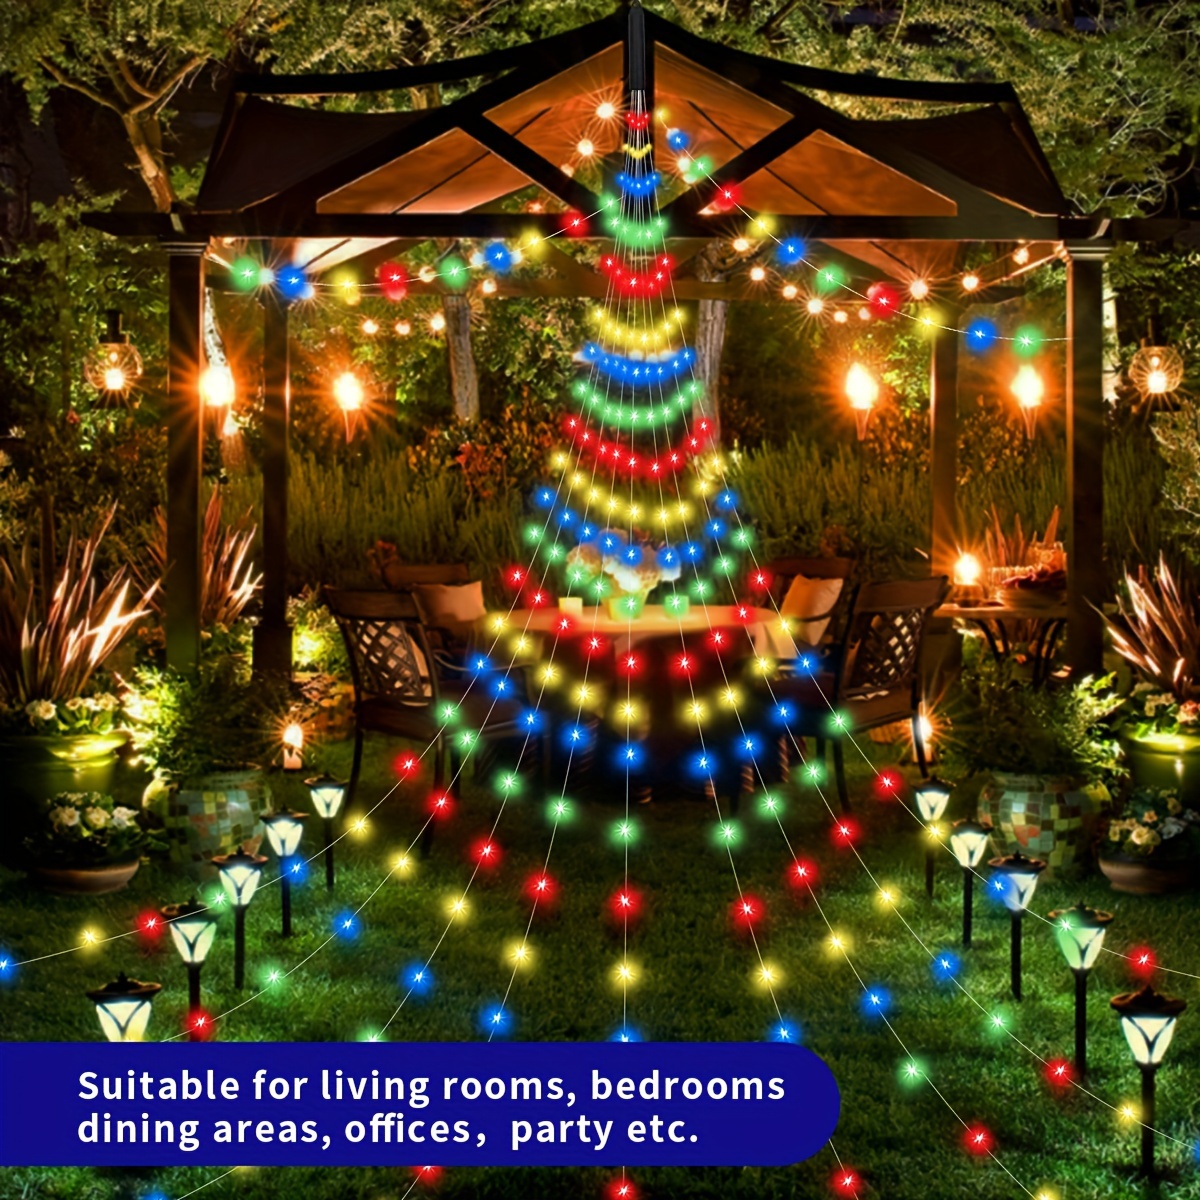  Outdoor Star Lights, 305LED Waterfall Christmas Tree Lights  Remote Control APP Hanging Fairy Light Plug in IP65 Waterproof, for Yard  Patio Roof Holiday Christmas Decor （Phantom Colour : Tools & Home